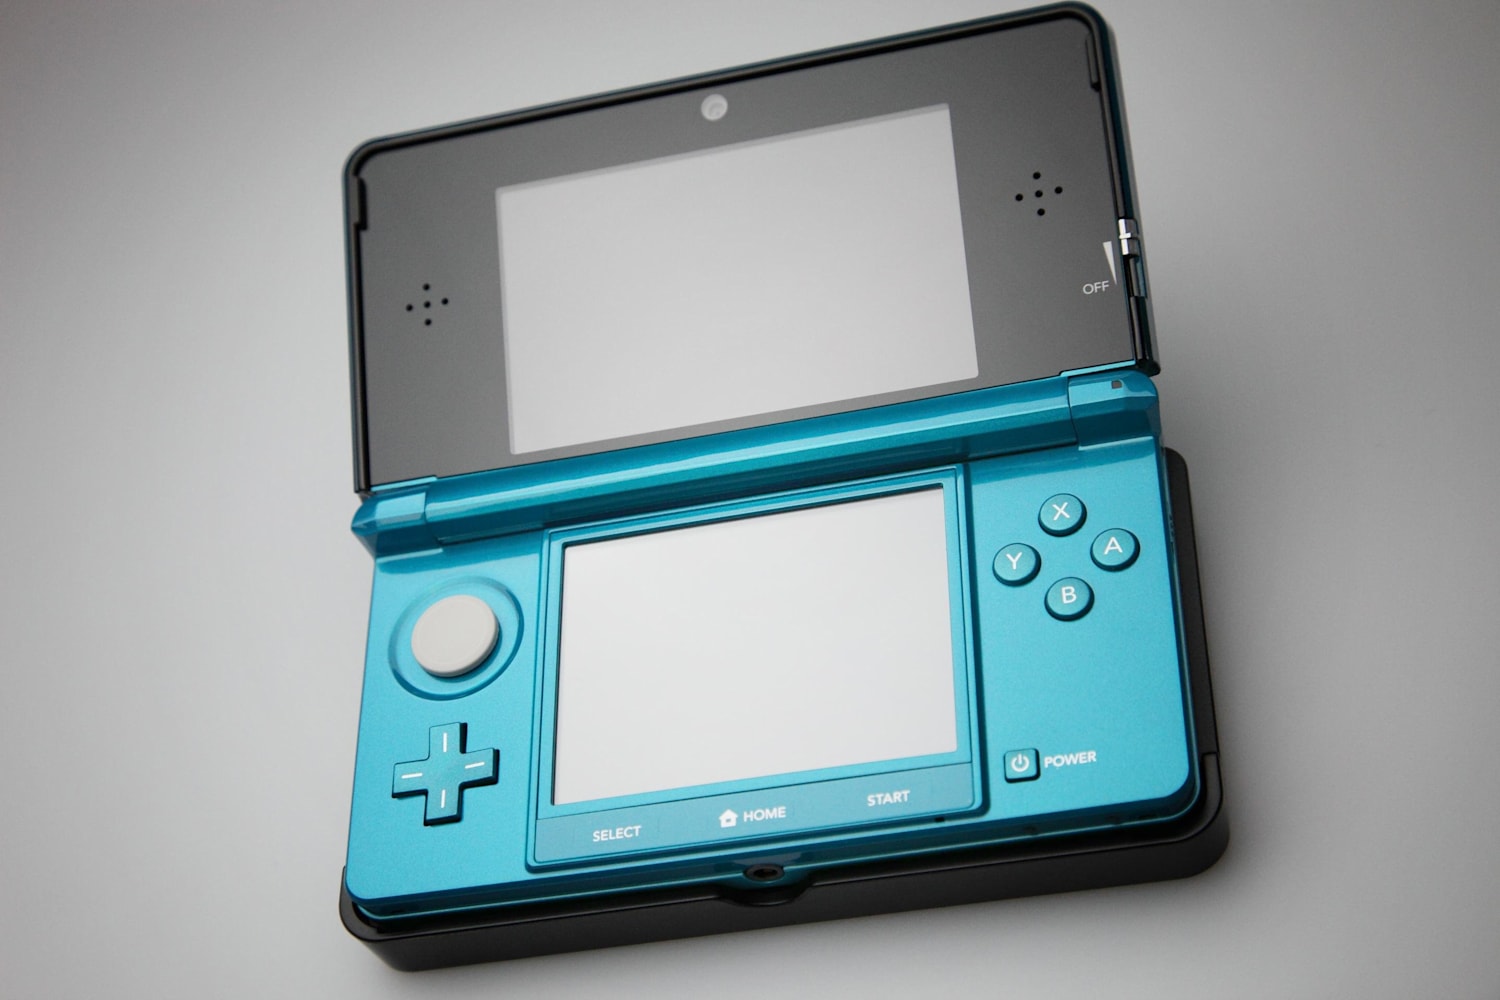 will ds games work on 3ds